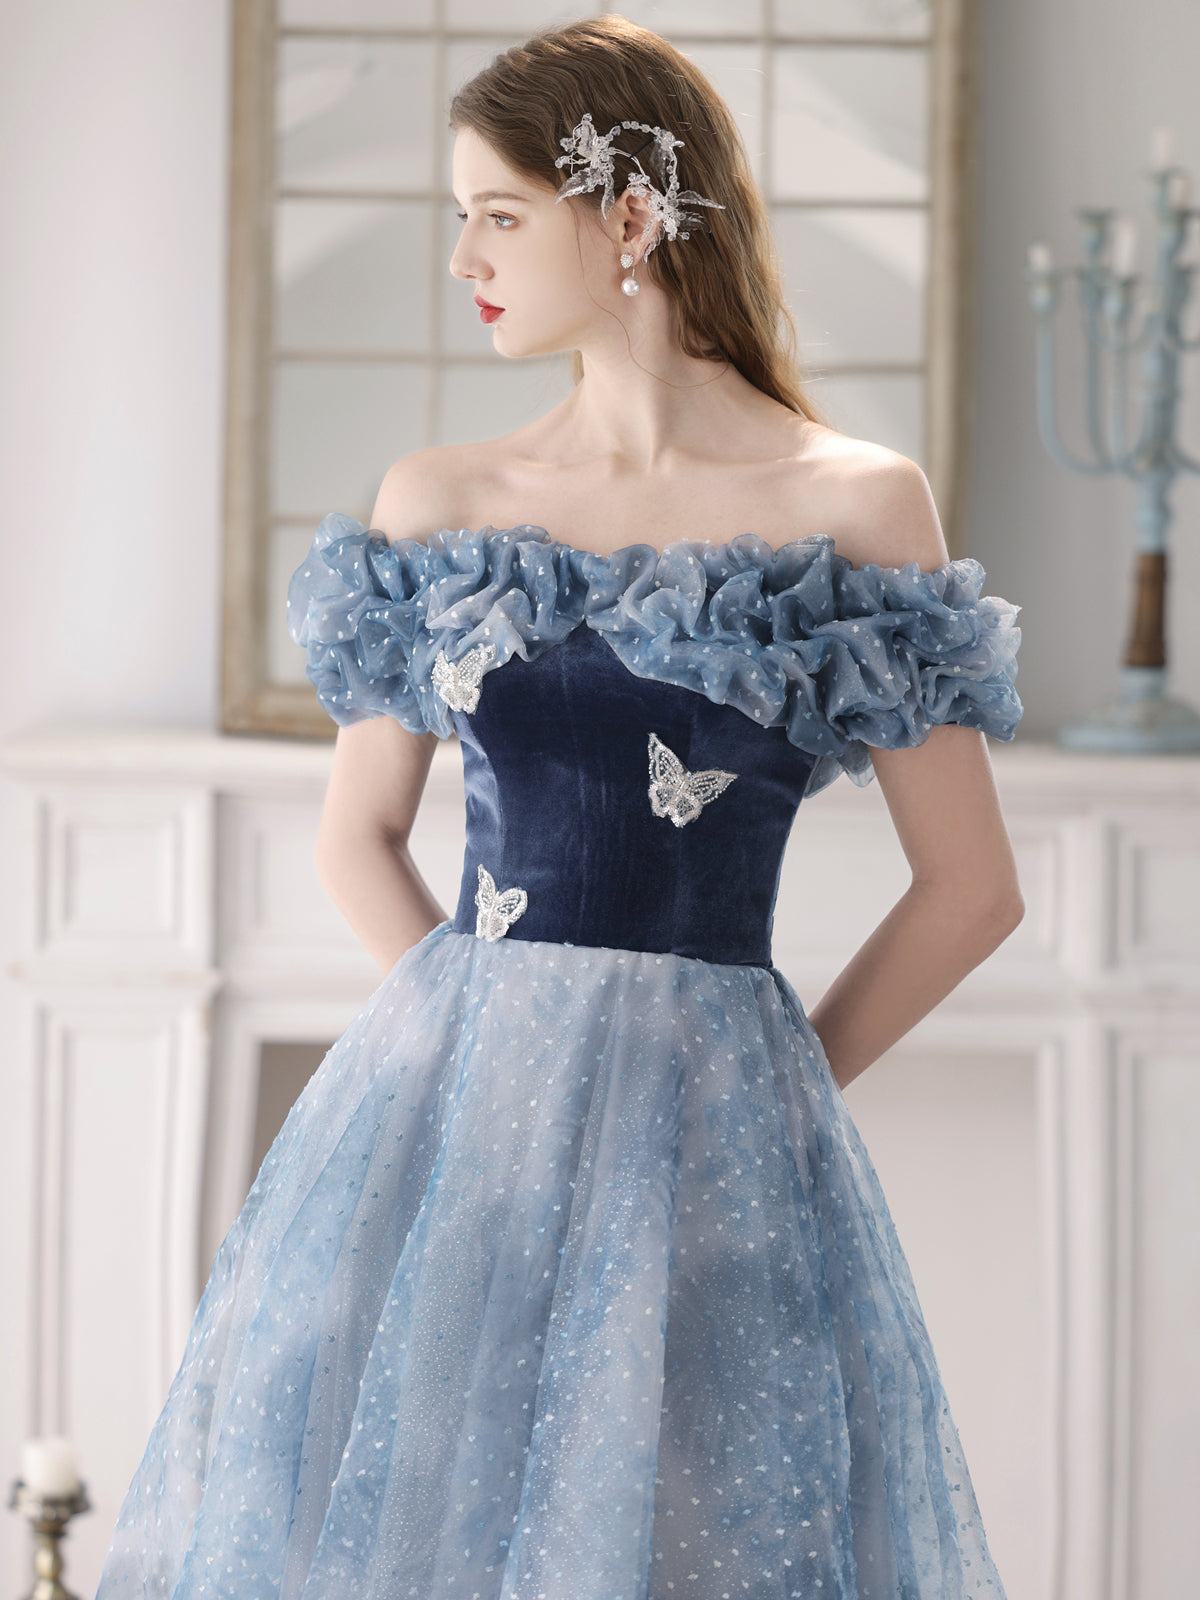 Enchanting Off-Shoulder Blue Tulle Ball Gown with Ruffled Bodice - Harmony Gallery